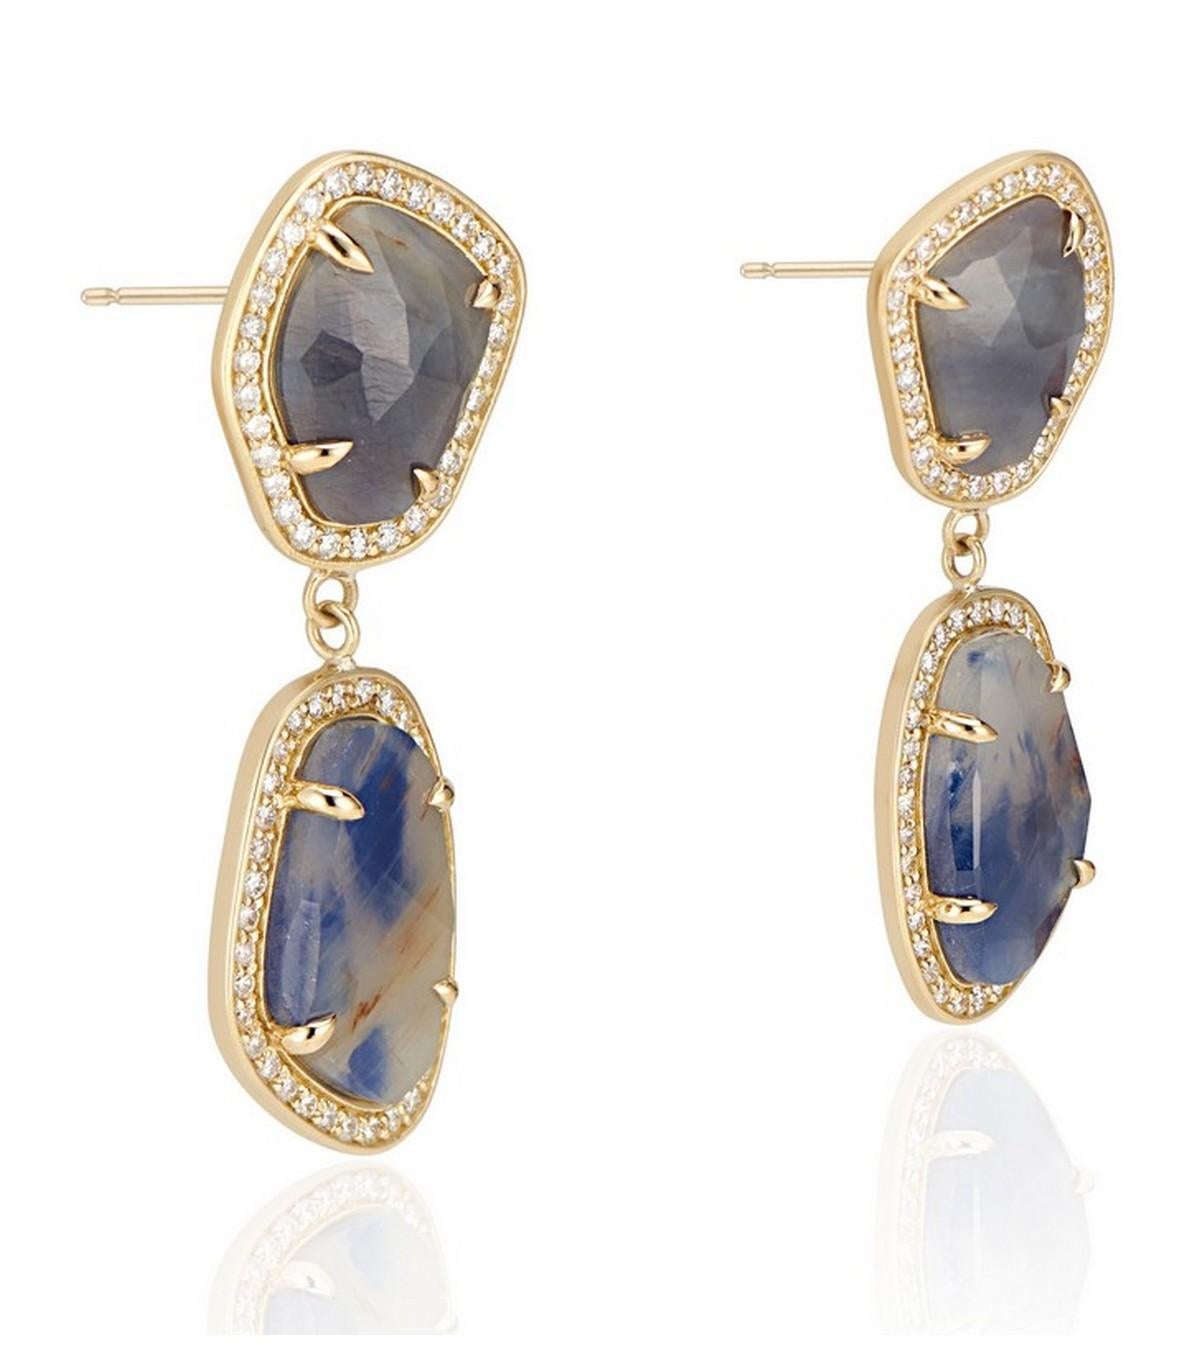 One-of-a-kind sapphire earrings, the wild and raw beauty of these uniquely colored natural sapphires illuminated with a halo of sparkling diamonds.

Each earring features a stunning slice of natural blue and cognac sapphire that has been